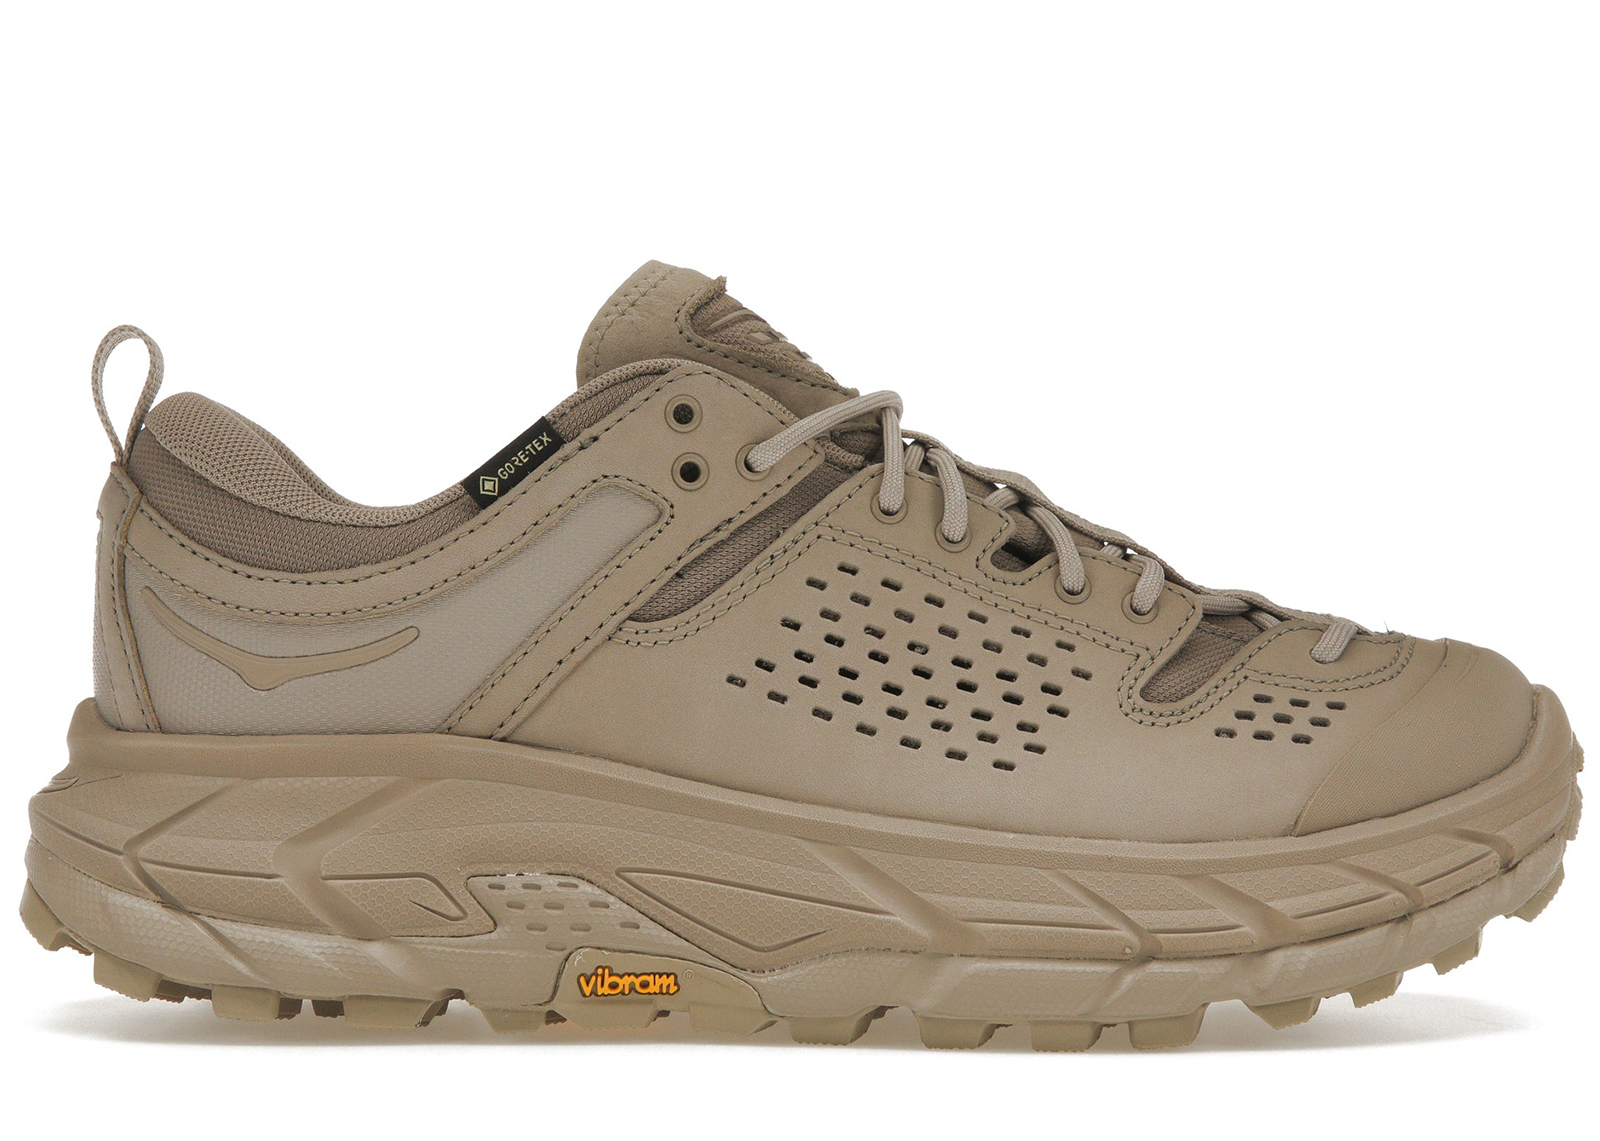 Hoka One One Tor Ultra Low Simply Taupe (All Gender)